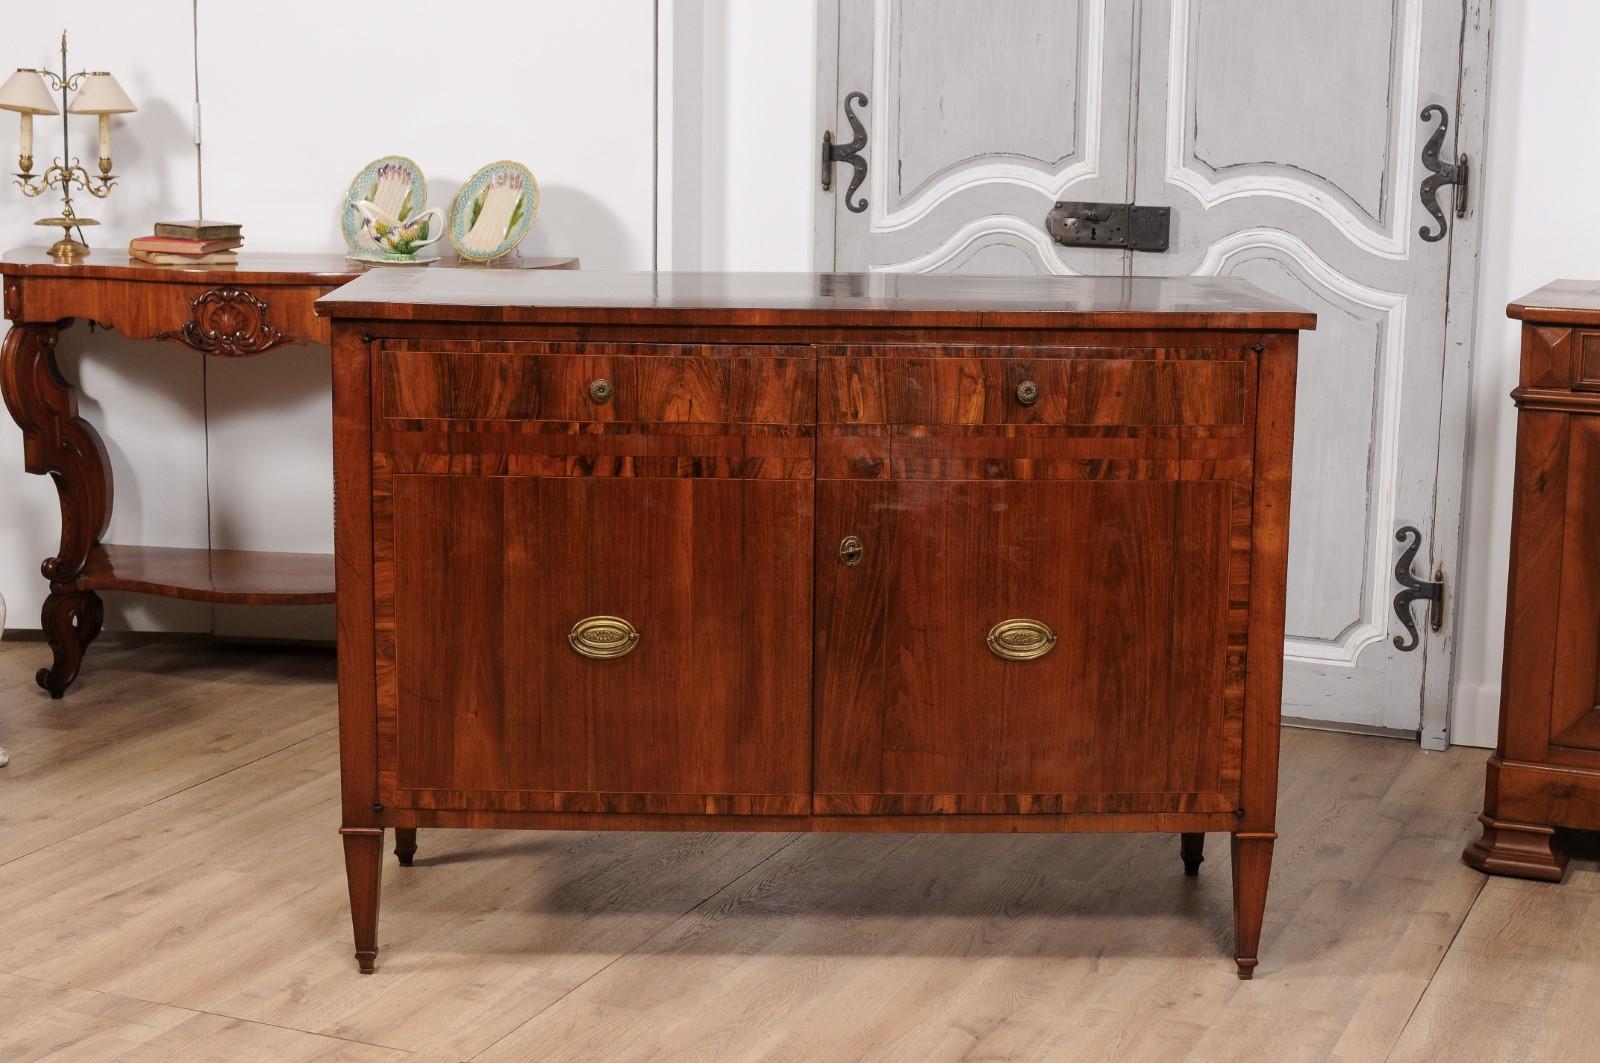 Italian 1780s Walnut and Mahogany Buffet with Cross Banding and Tapered Legs In Good Condition For Sale In Atlanta, GA